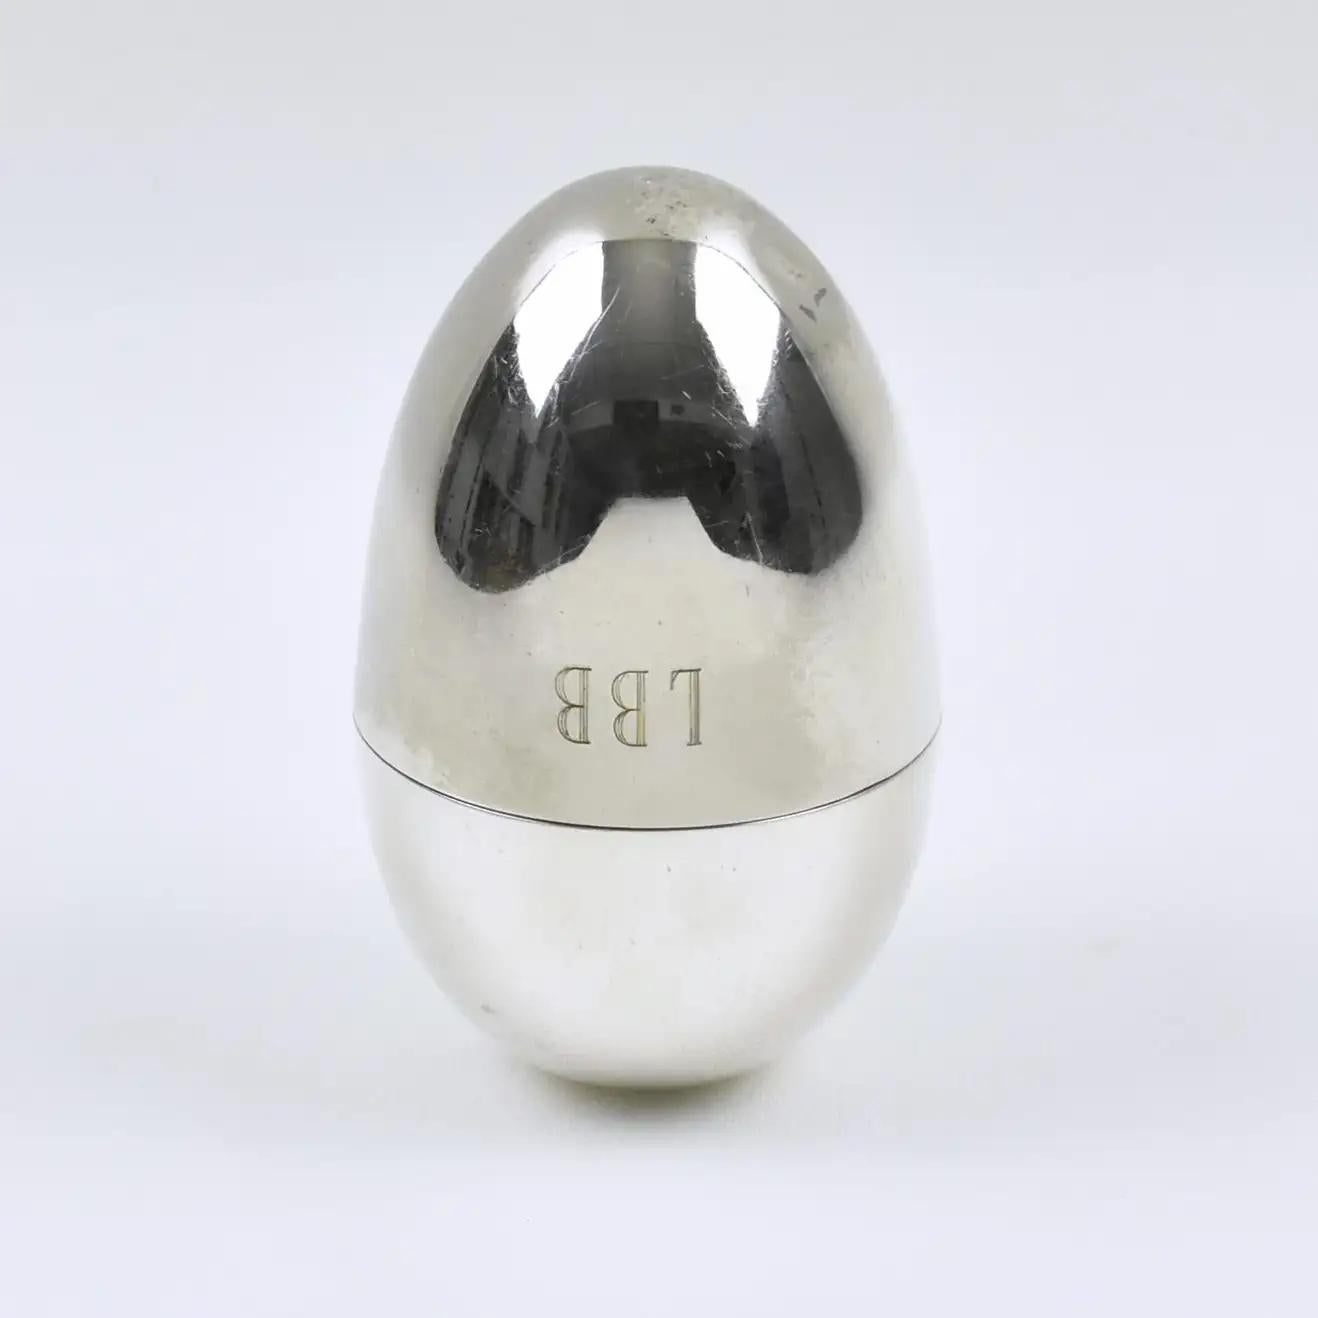 Mid-Century Modern Gabriella Crespi Italy Silver Plate Egg-Shaped Box, 1970s For Sale